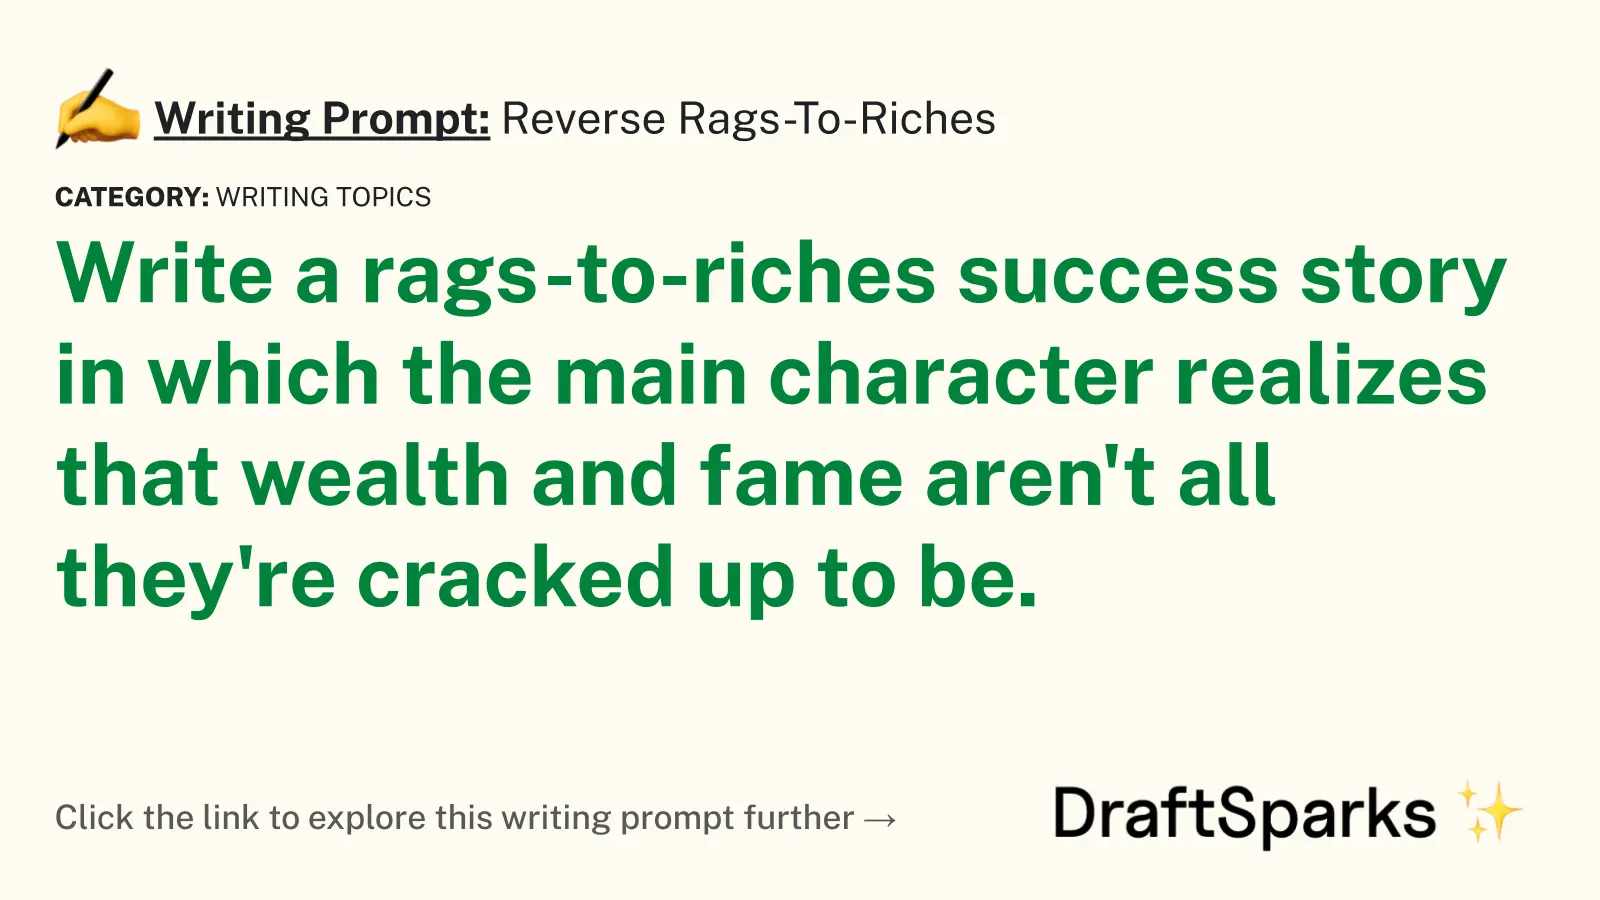 Reverse Rags-To-Riches